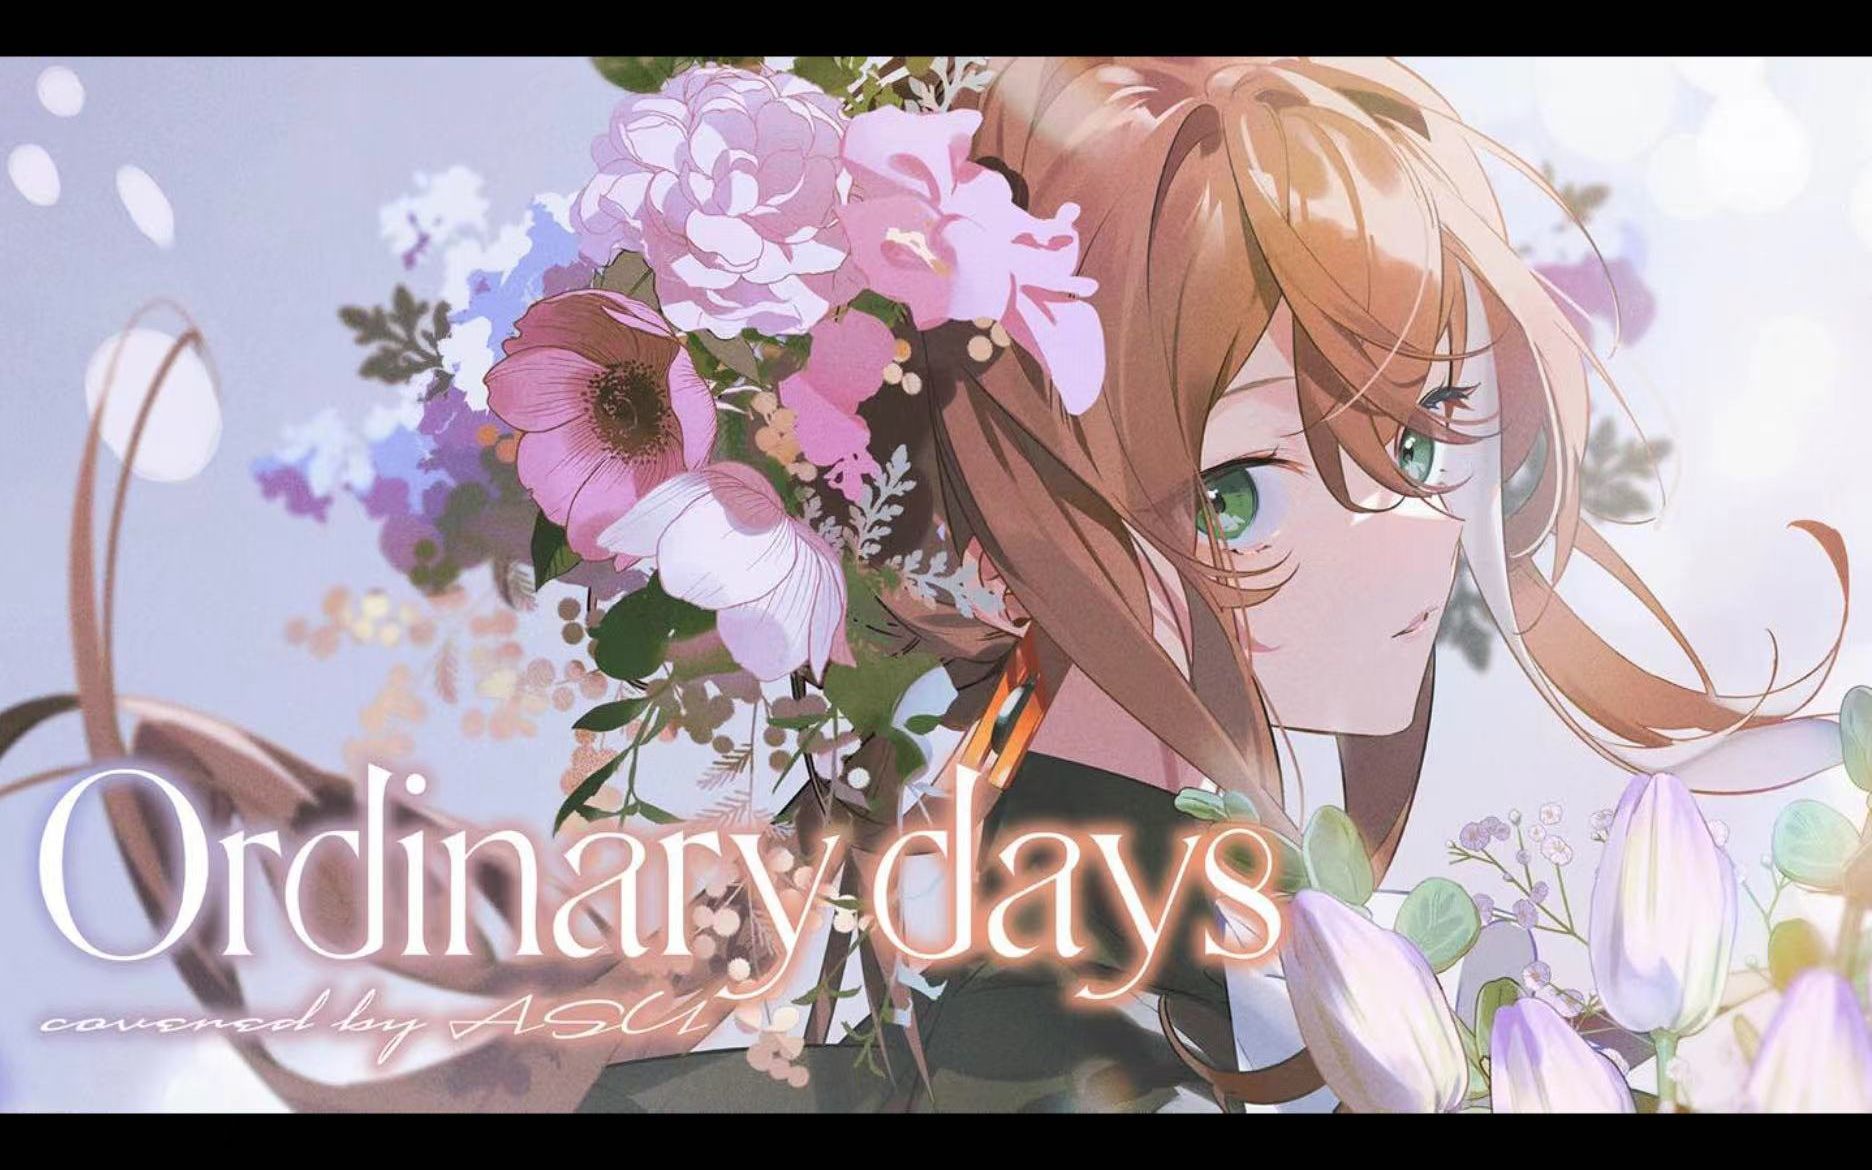 Ordinary days - milet covered by 明透